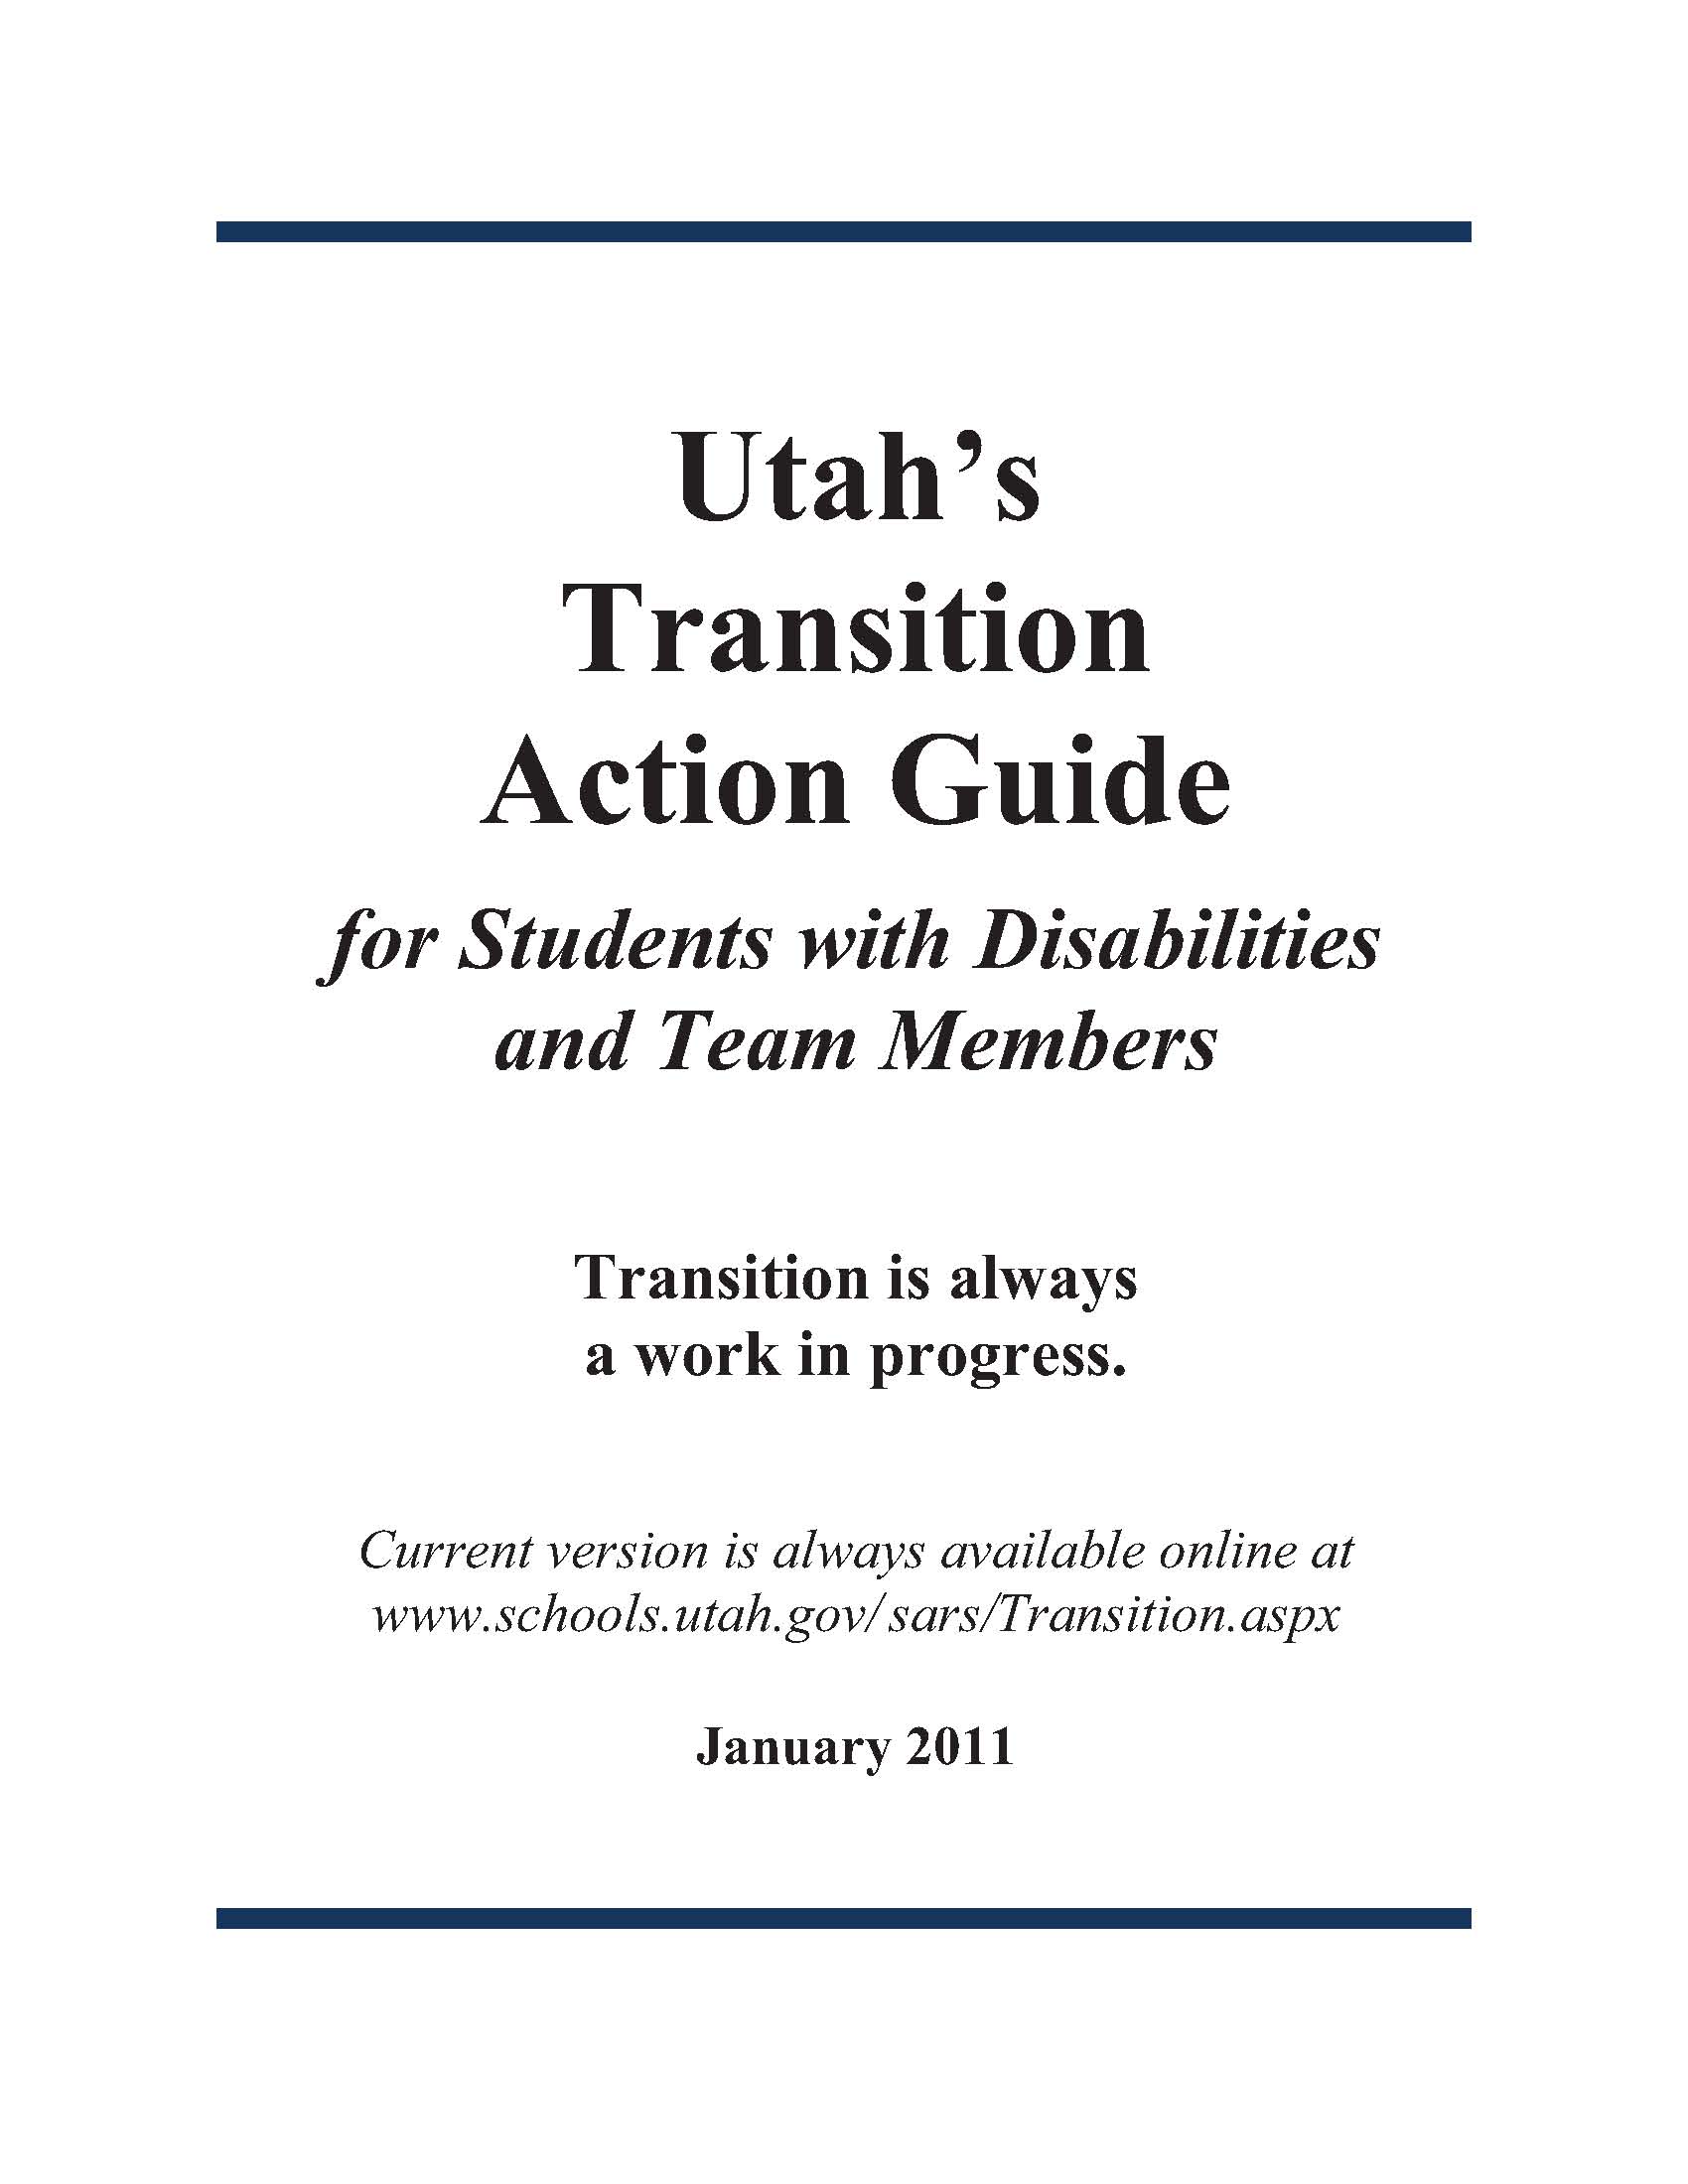 Utah's Transition Action Guide.